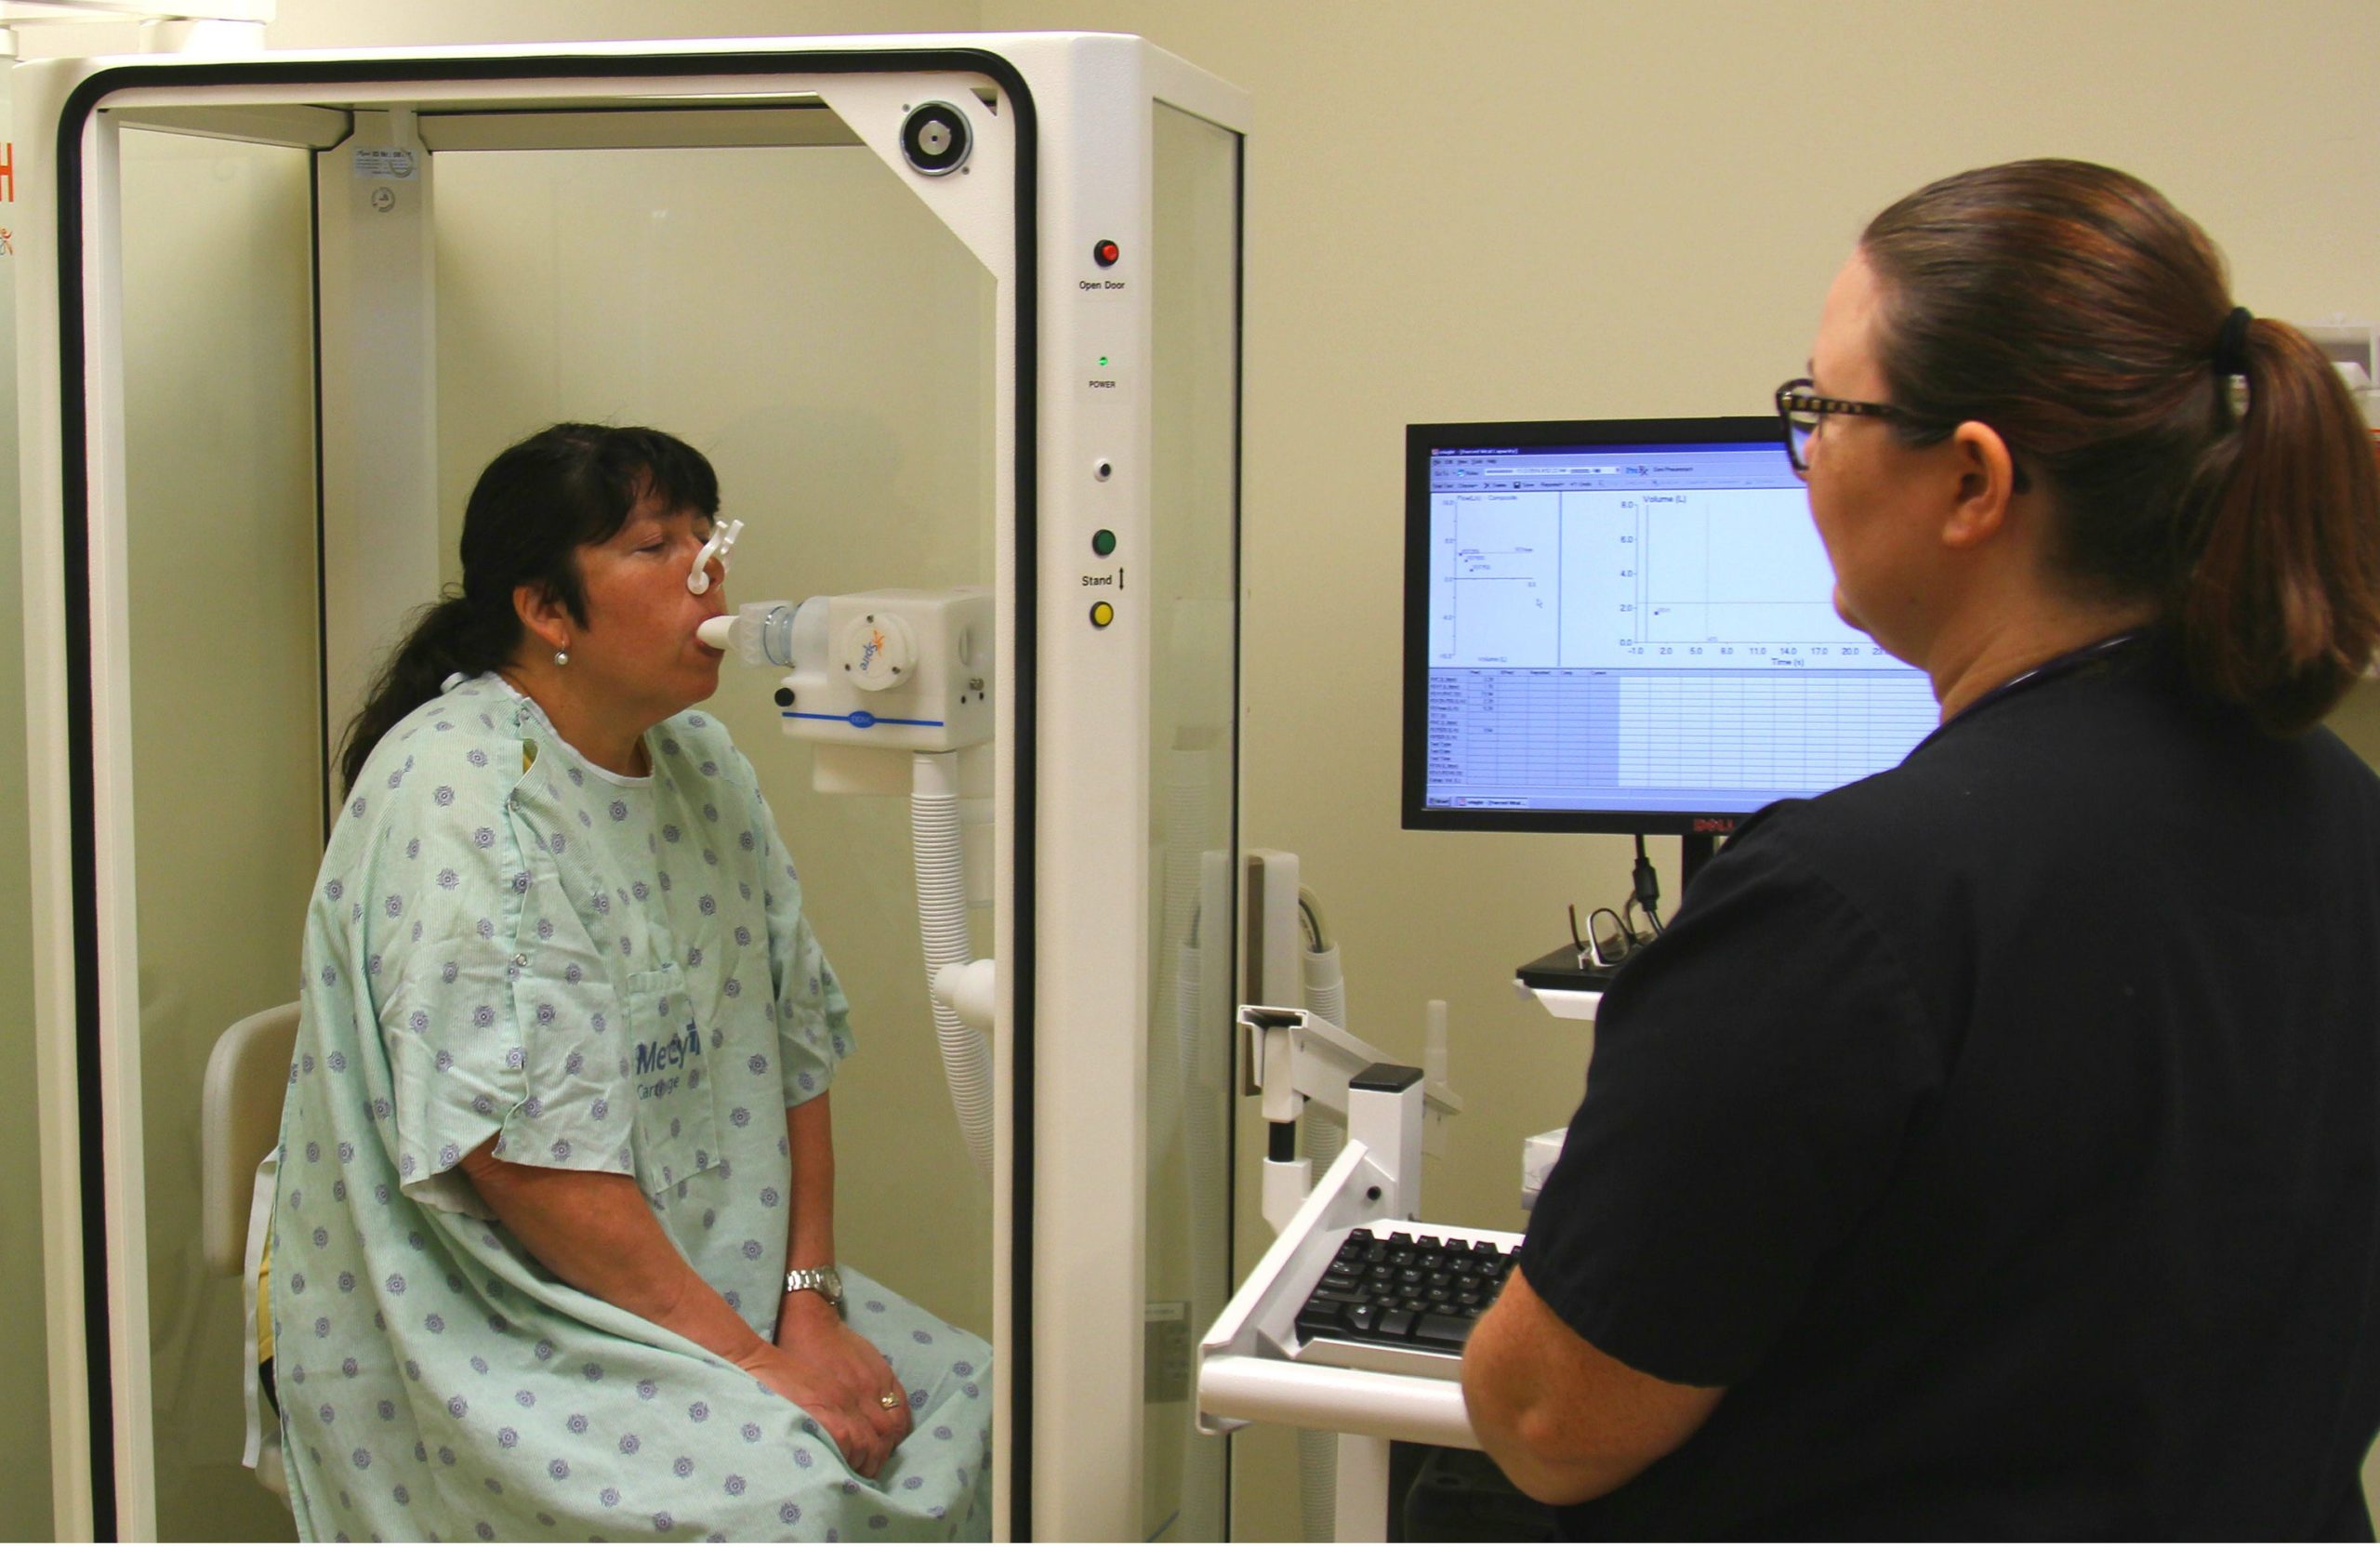 Pulmonary testing - picture of woman in hospital gown getting a Pulmonary test